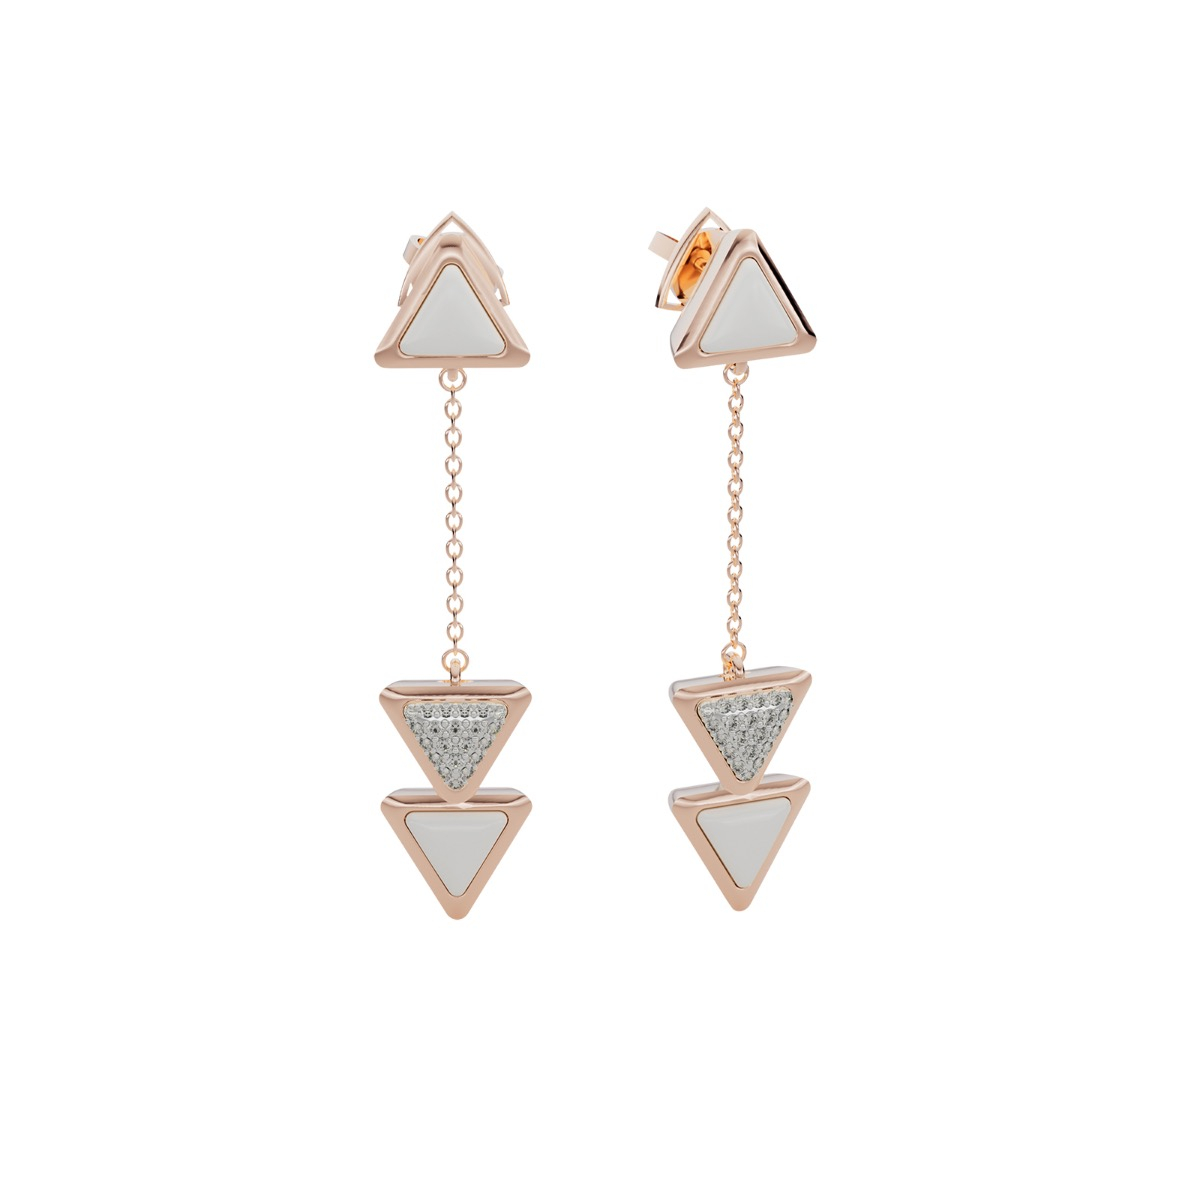 Earrings Dove Vai Rewind Exquisite Rose Gold Kogolong and Diamonds